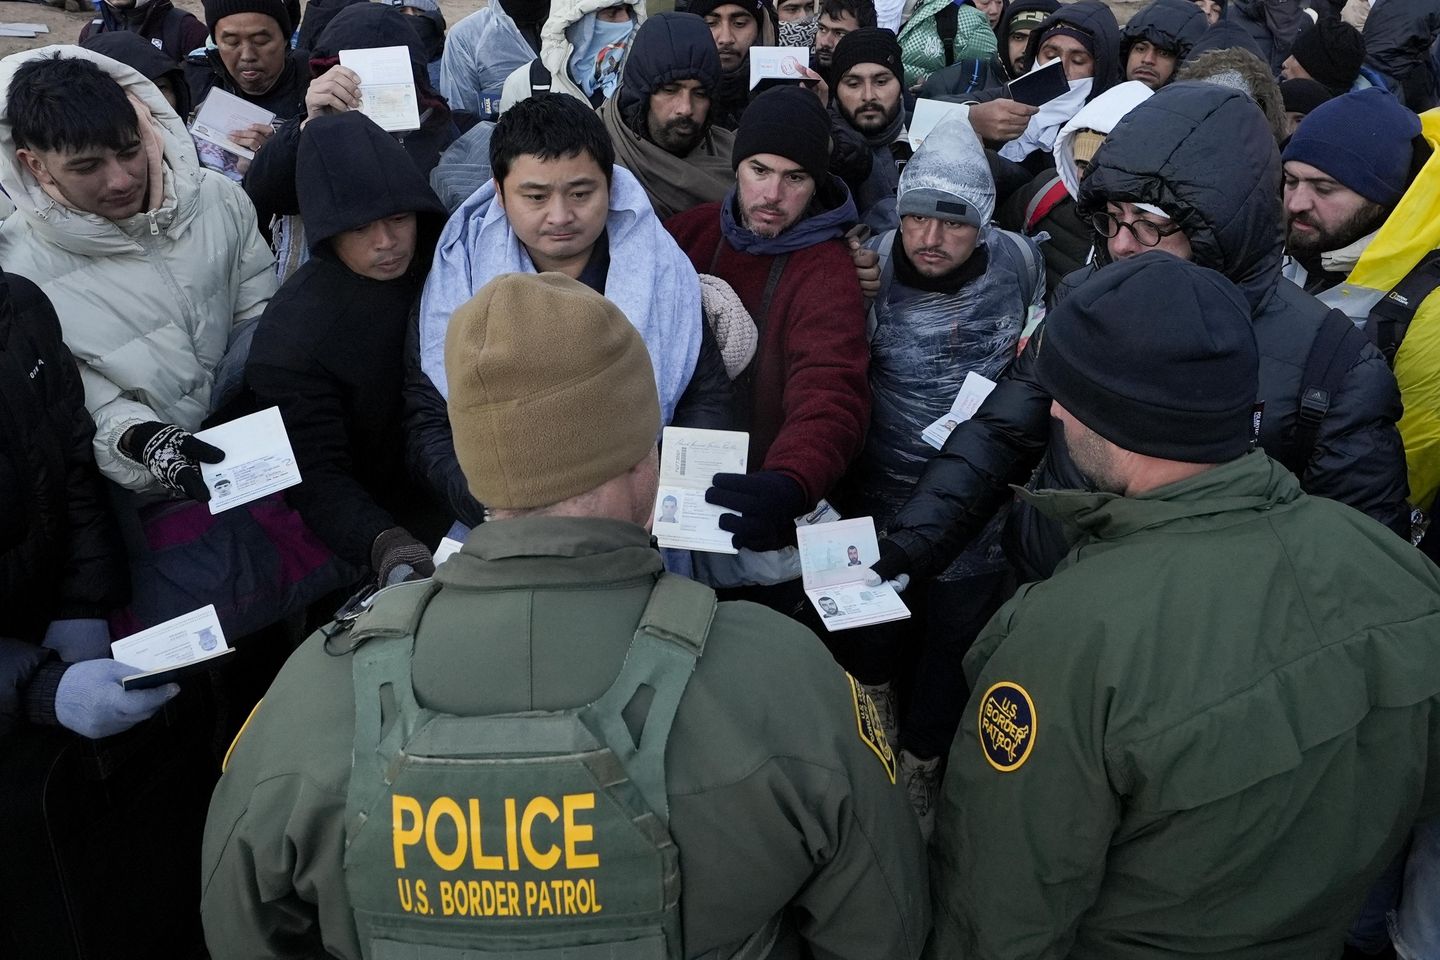 New fast-track immigration court docket aims to speed up removals of newly arrived migrants